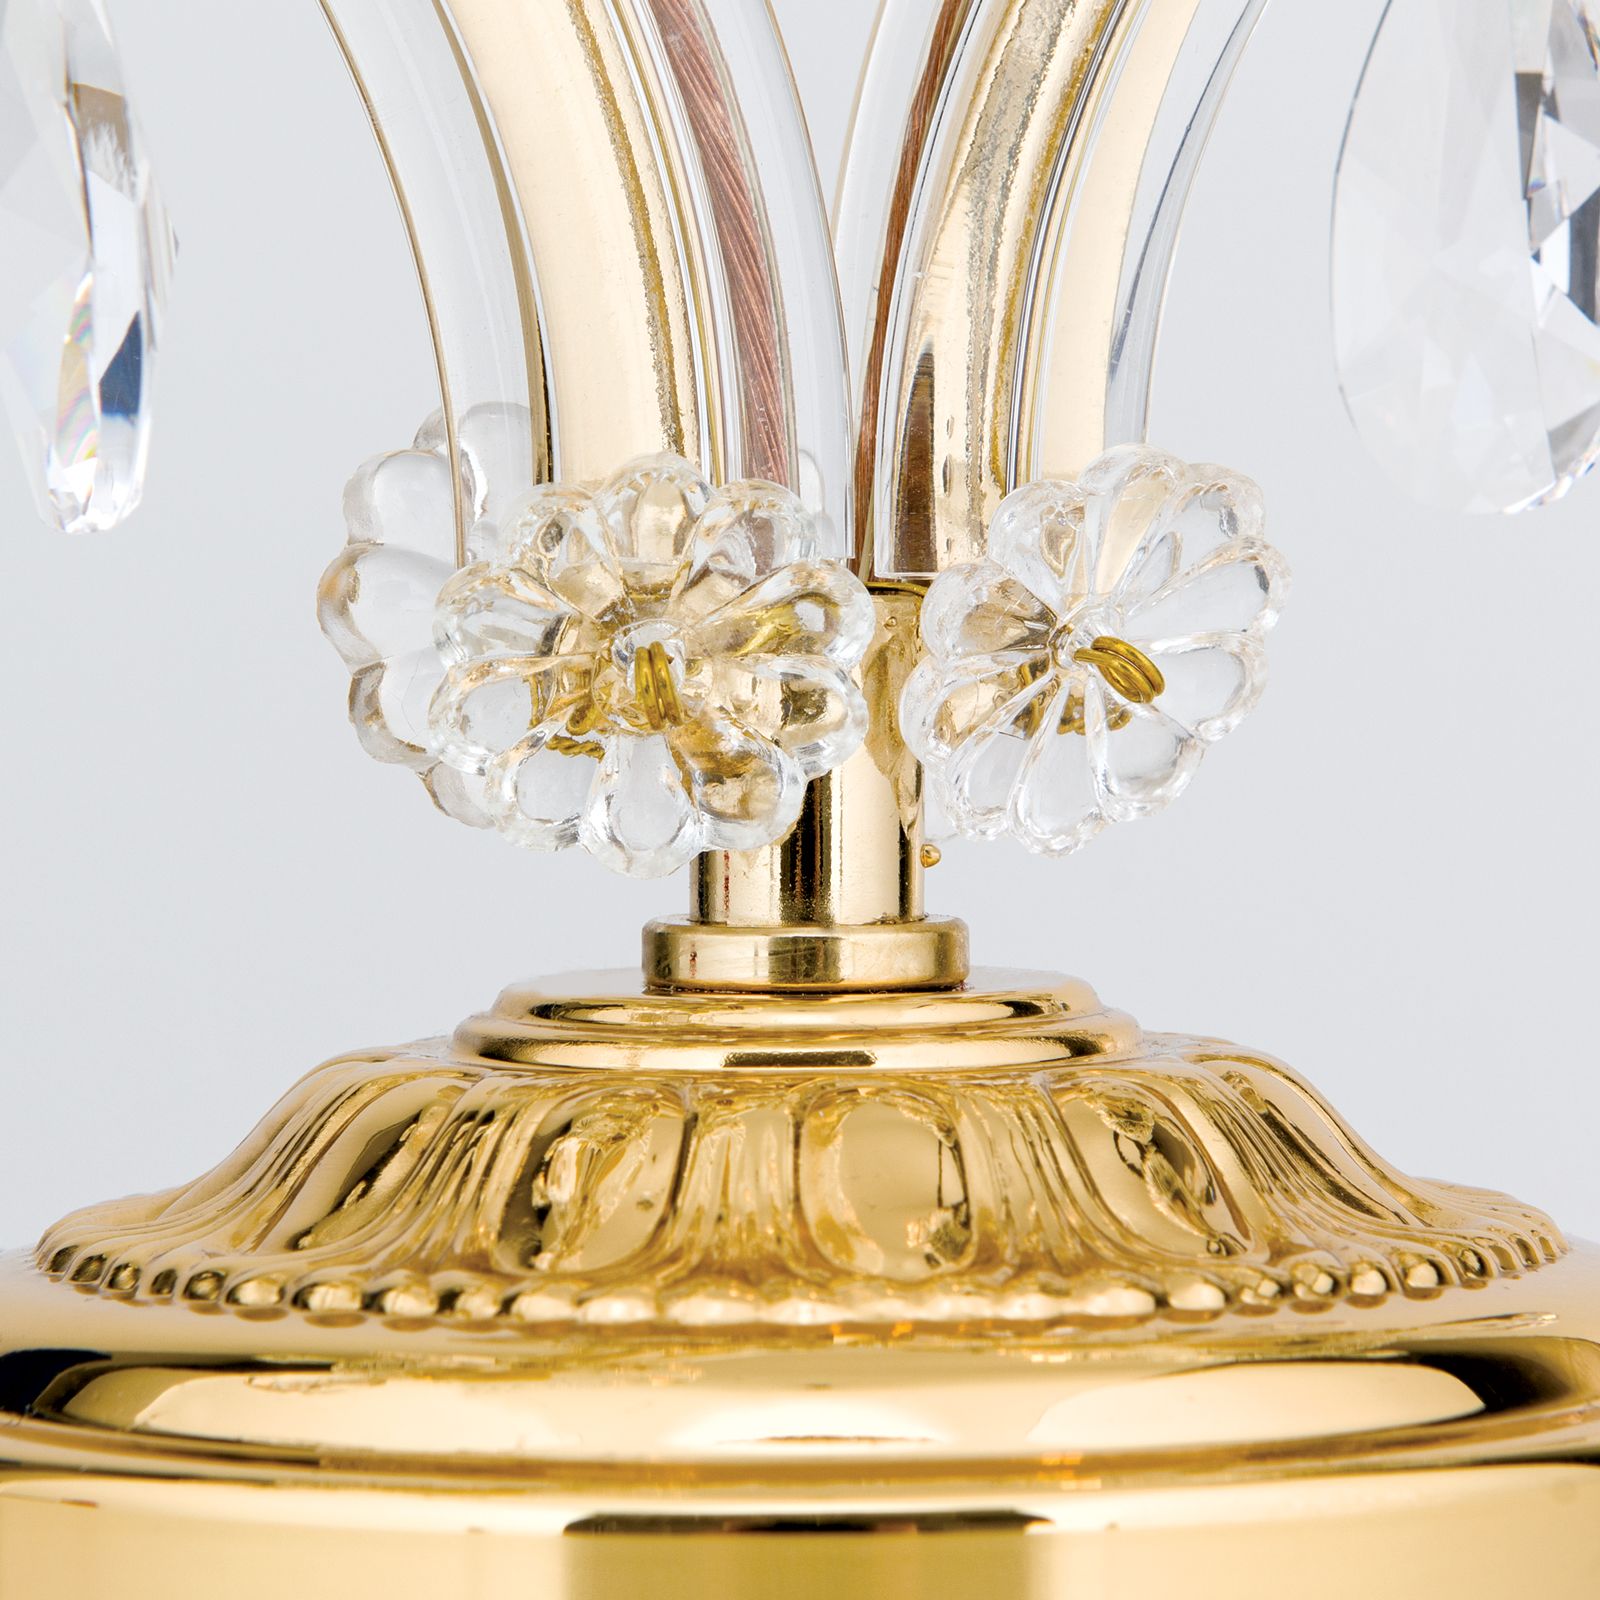 Dreigend opblijven kussen Maria Theresia table lamp, 2 lamps, 24K gold plated